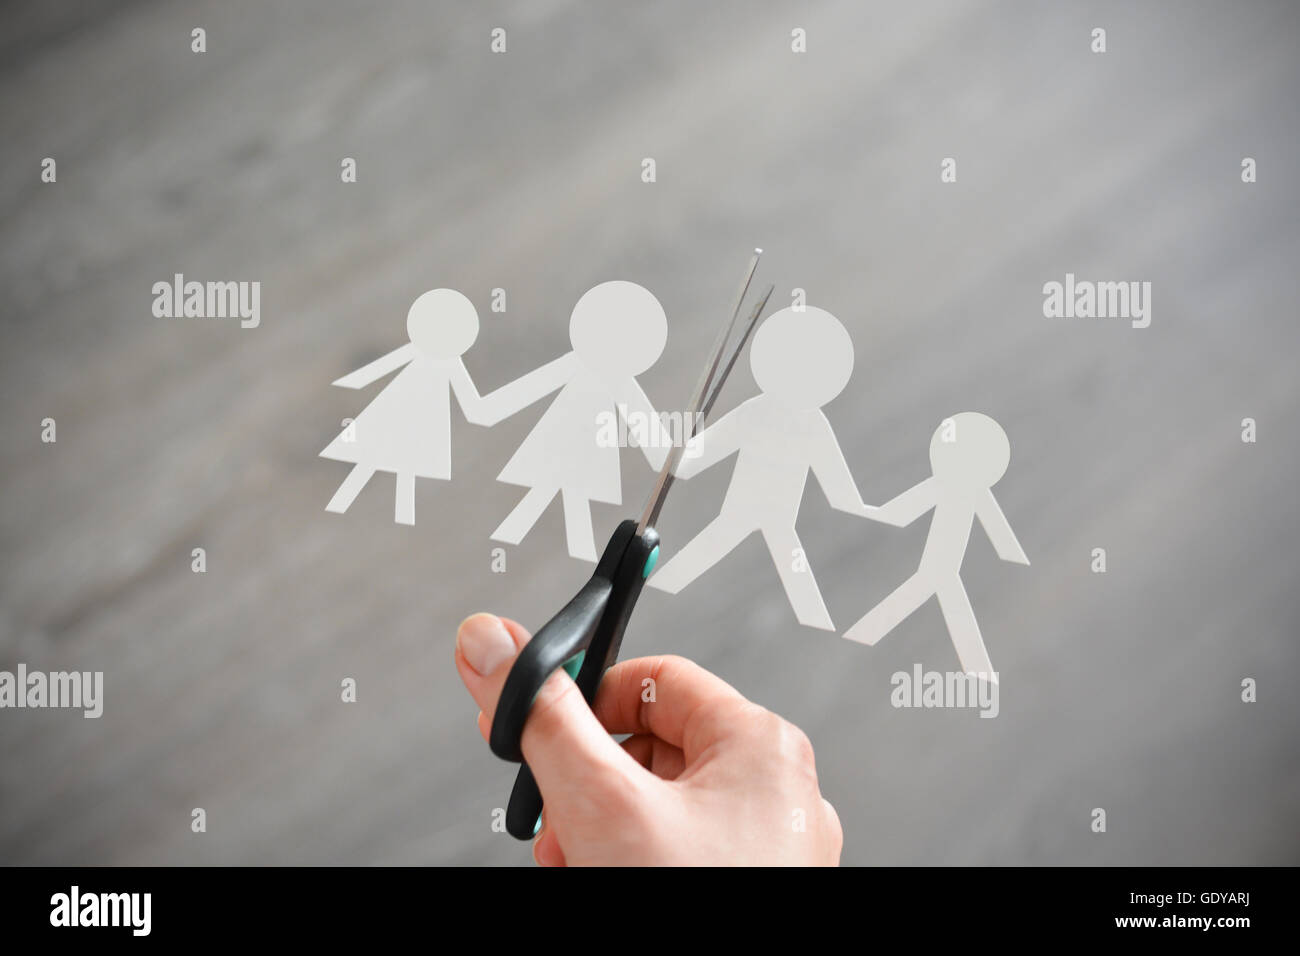 Family divorce concept with human paper shapes and scissors suggesting relationship problems Stock Photo